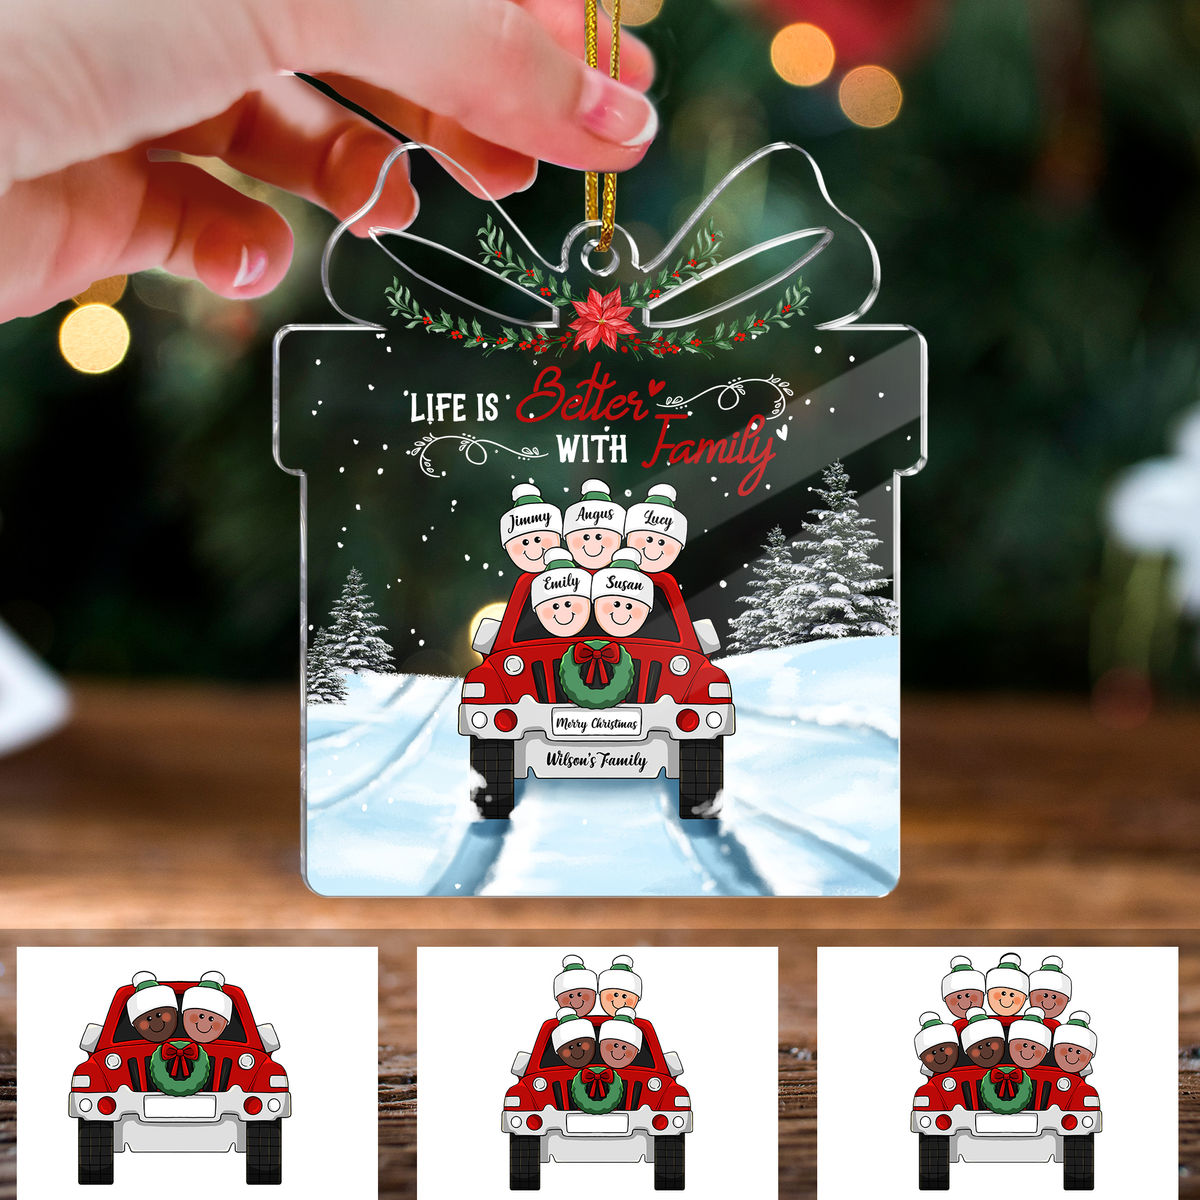 Life is better with family (Personalized Family In Car) (Custom Gift - Shaped Acrylic Ornament)